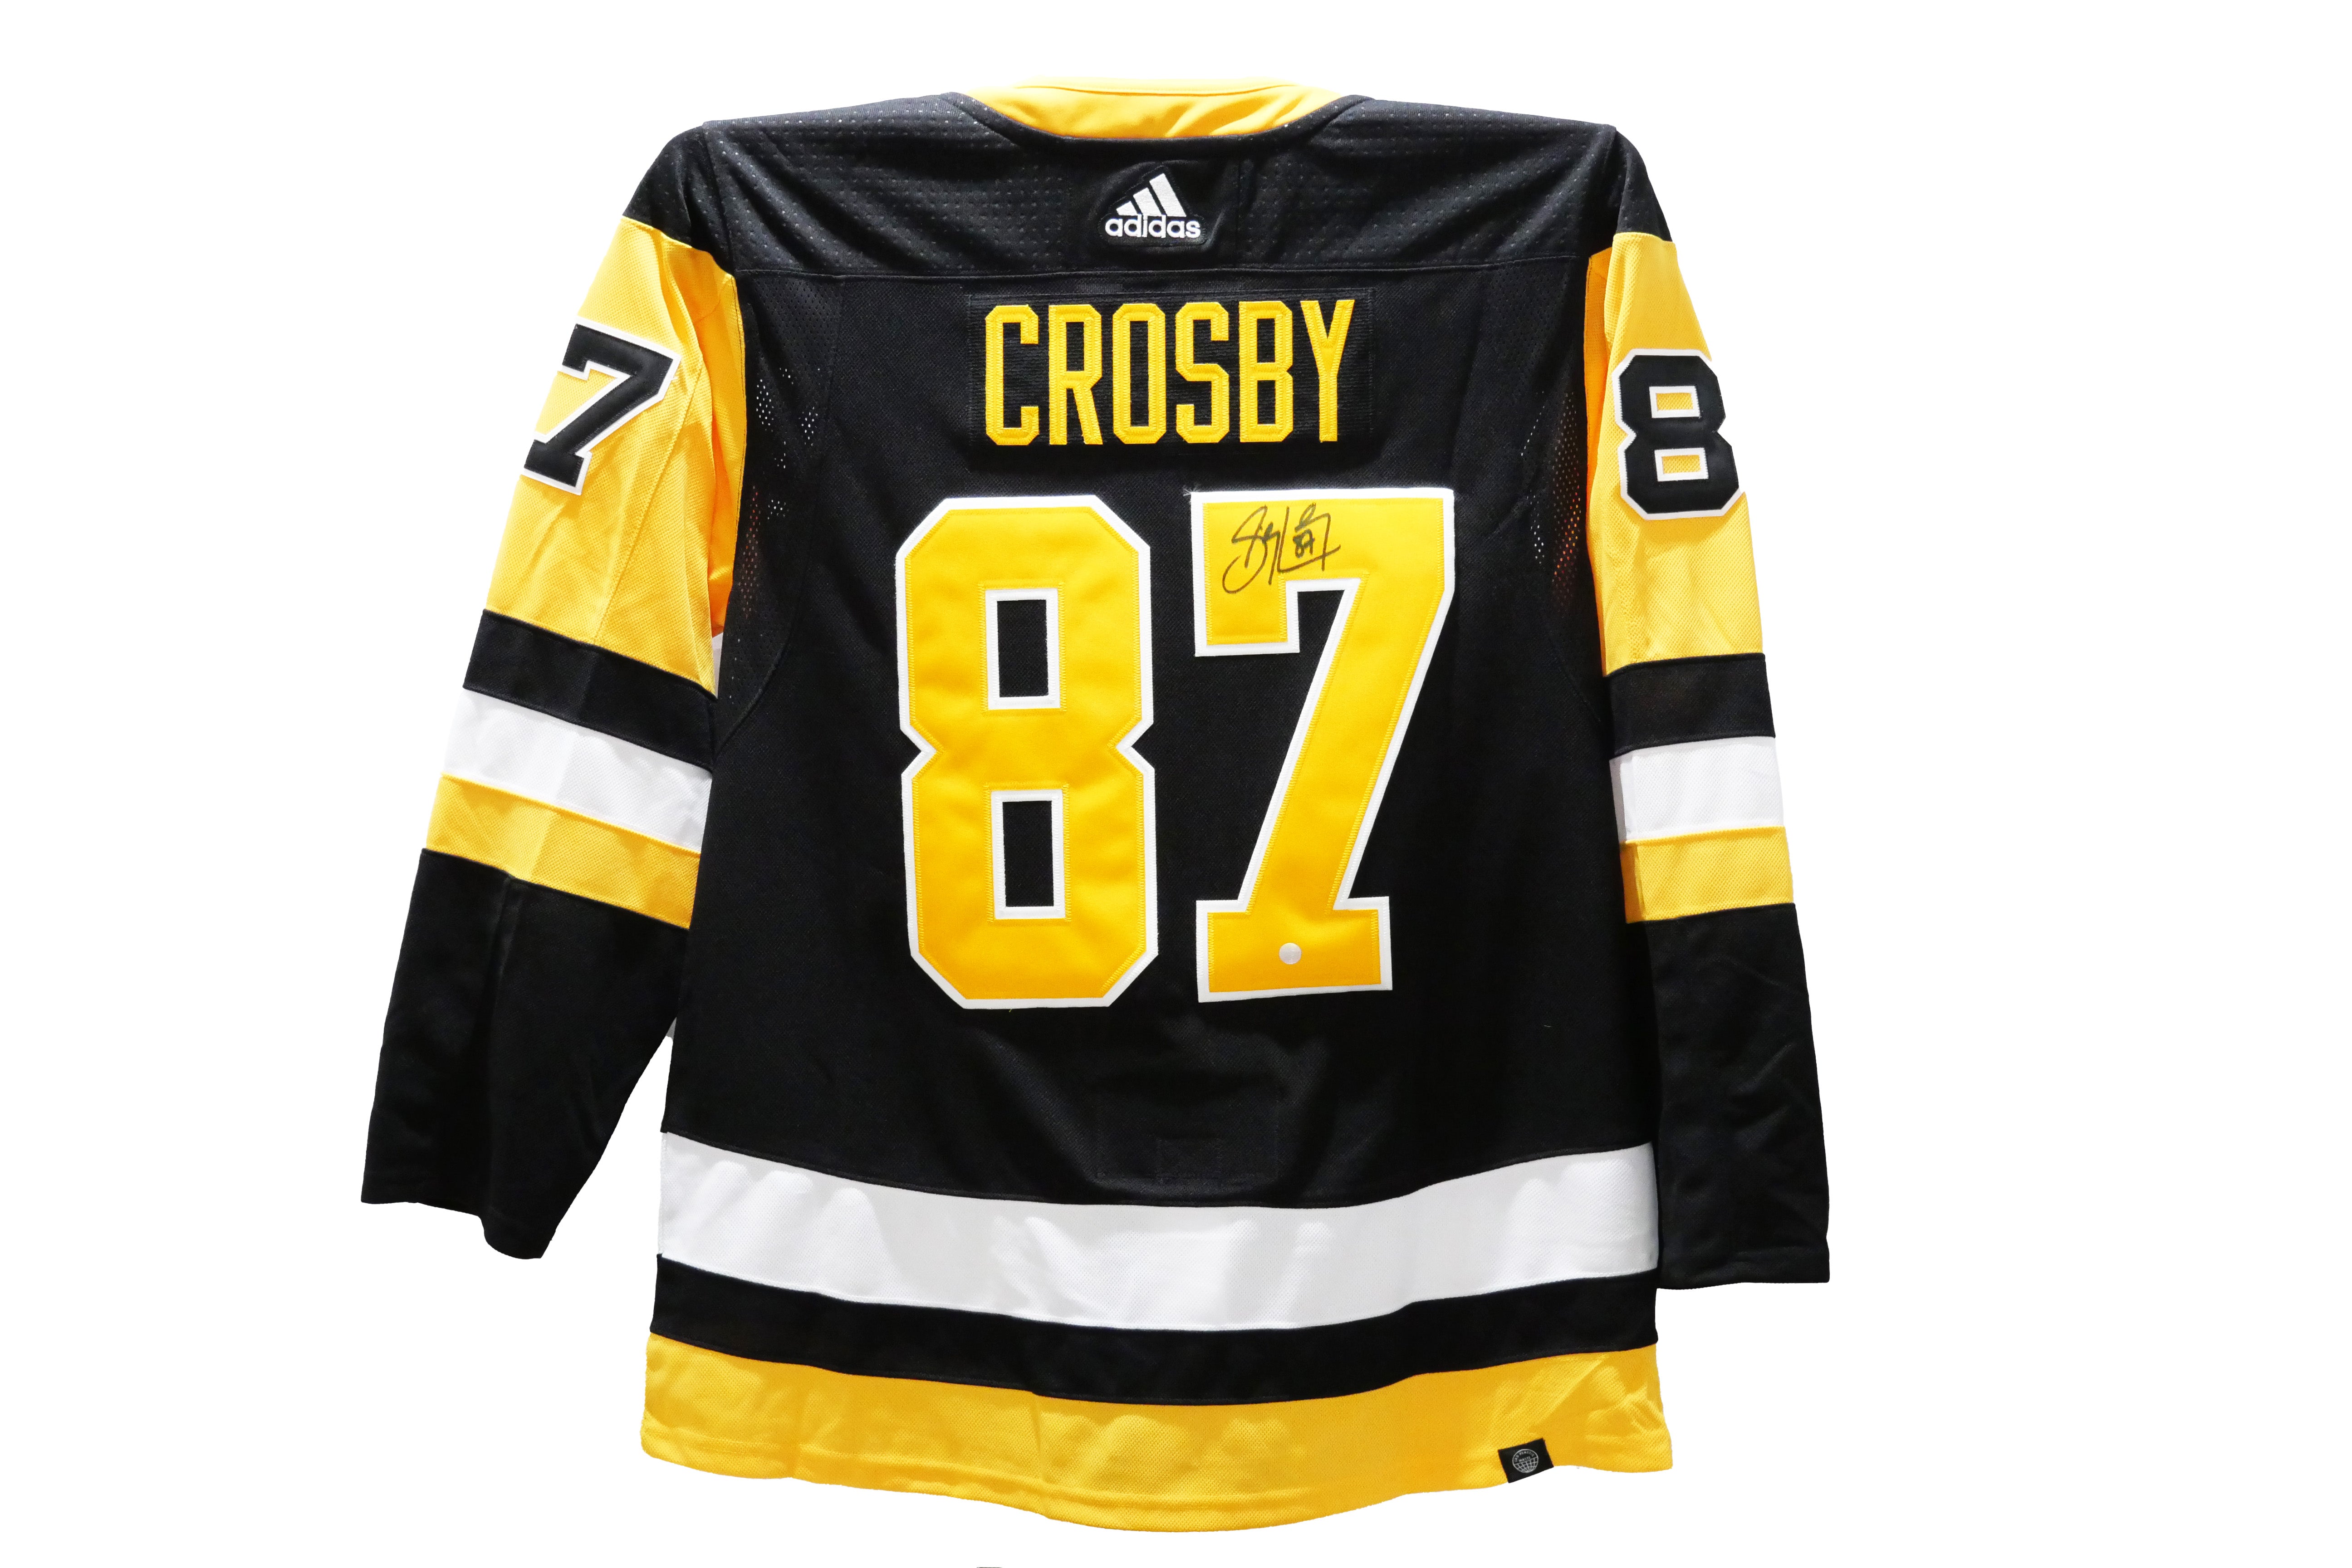 Sidney Crosby Authentic Autographed Pittsburgh Penguins Home Jersey